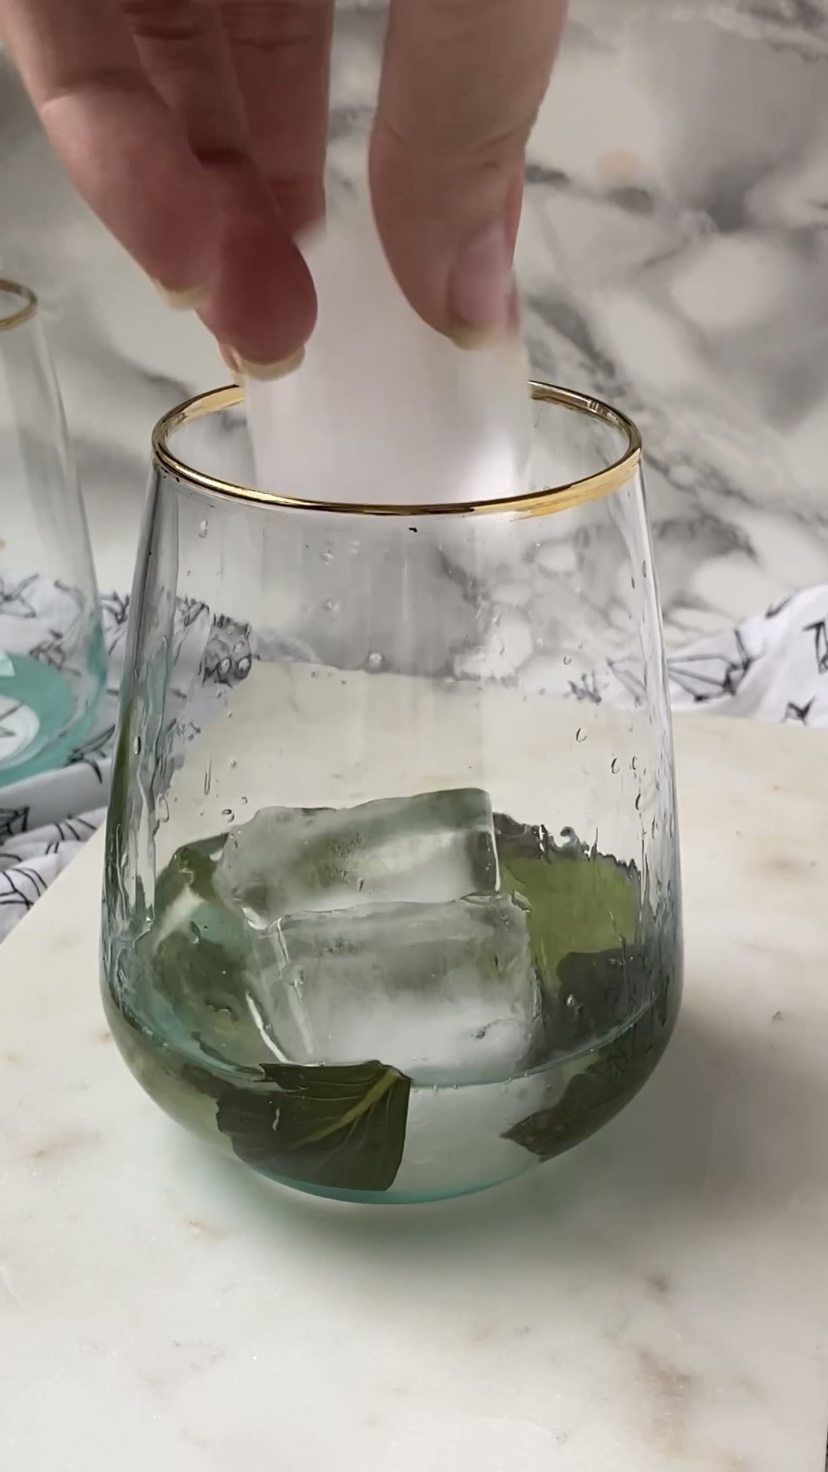 Adding ice to a cocktail glass.